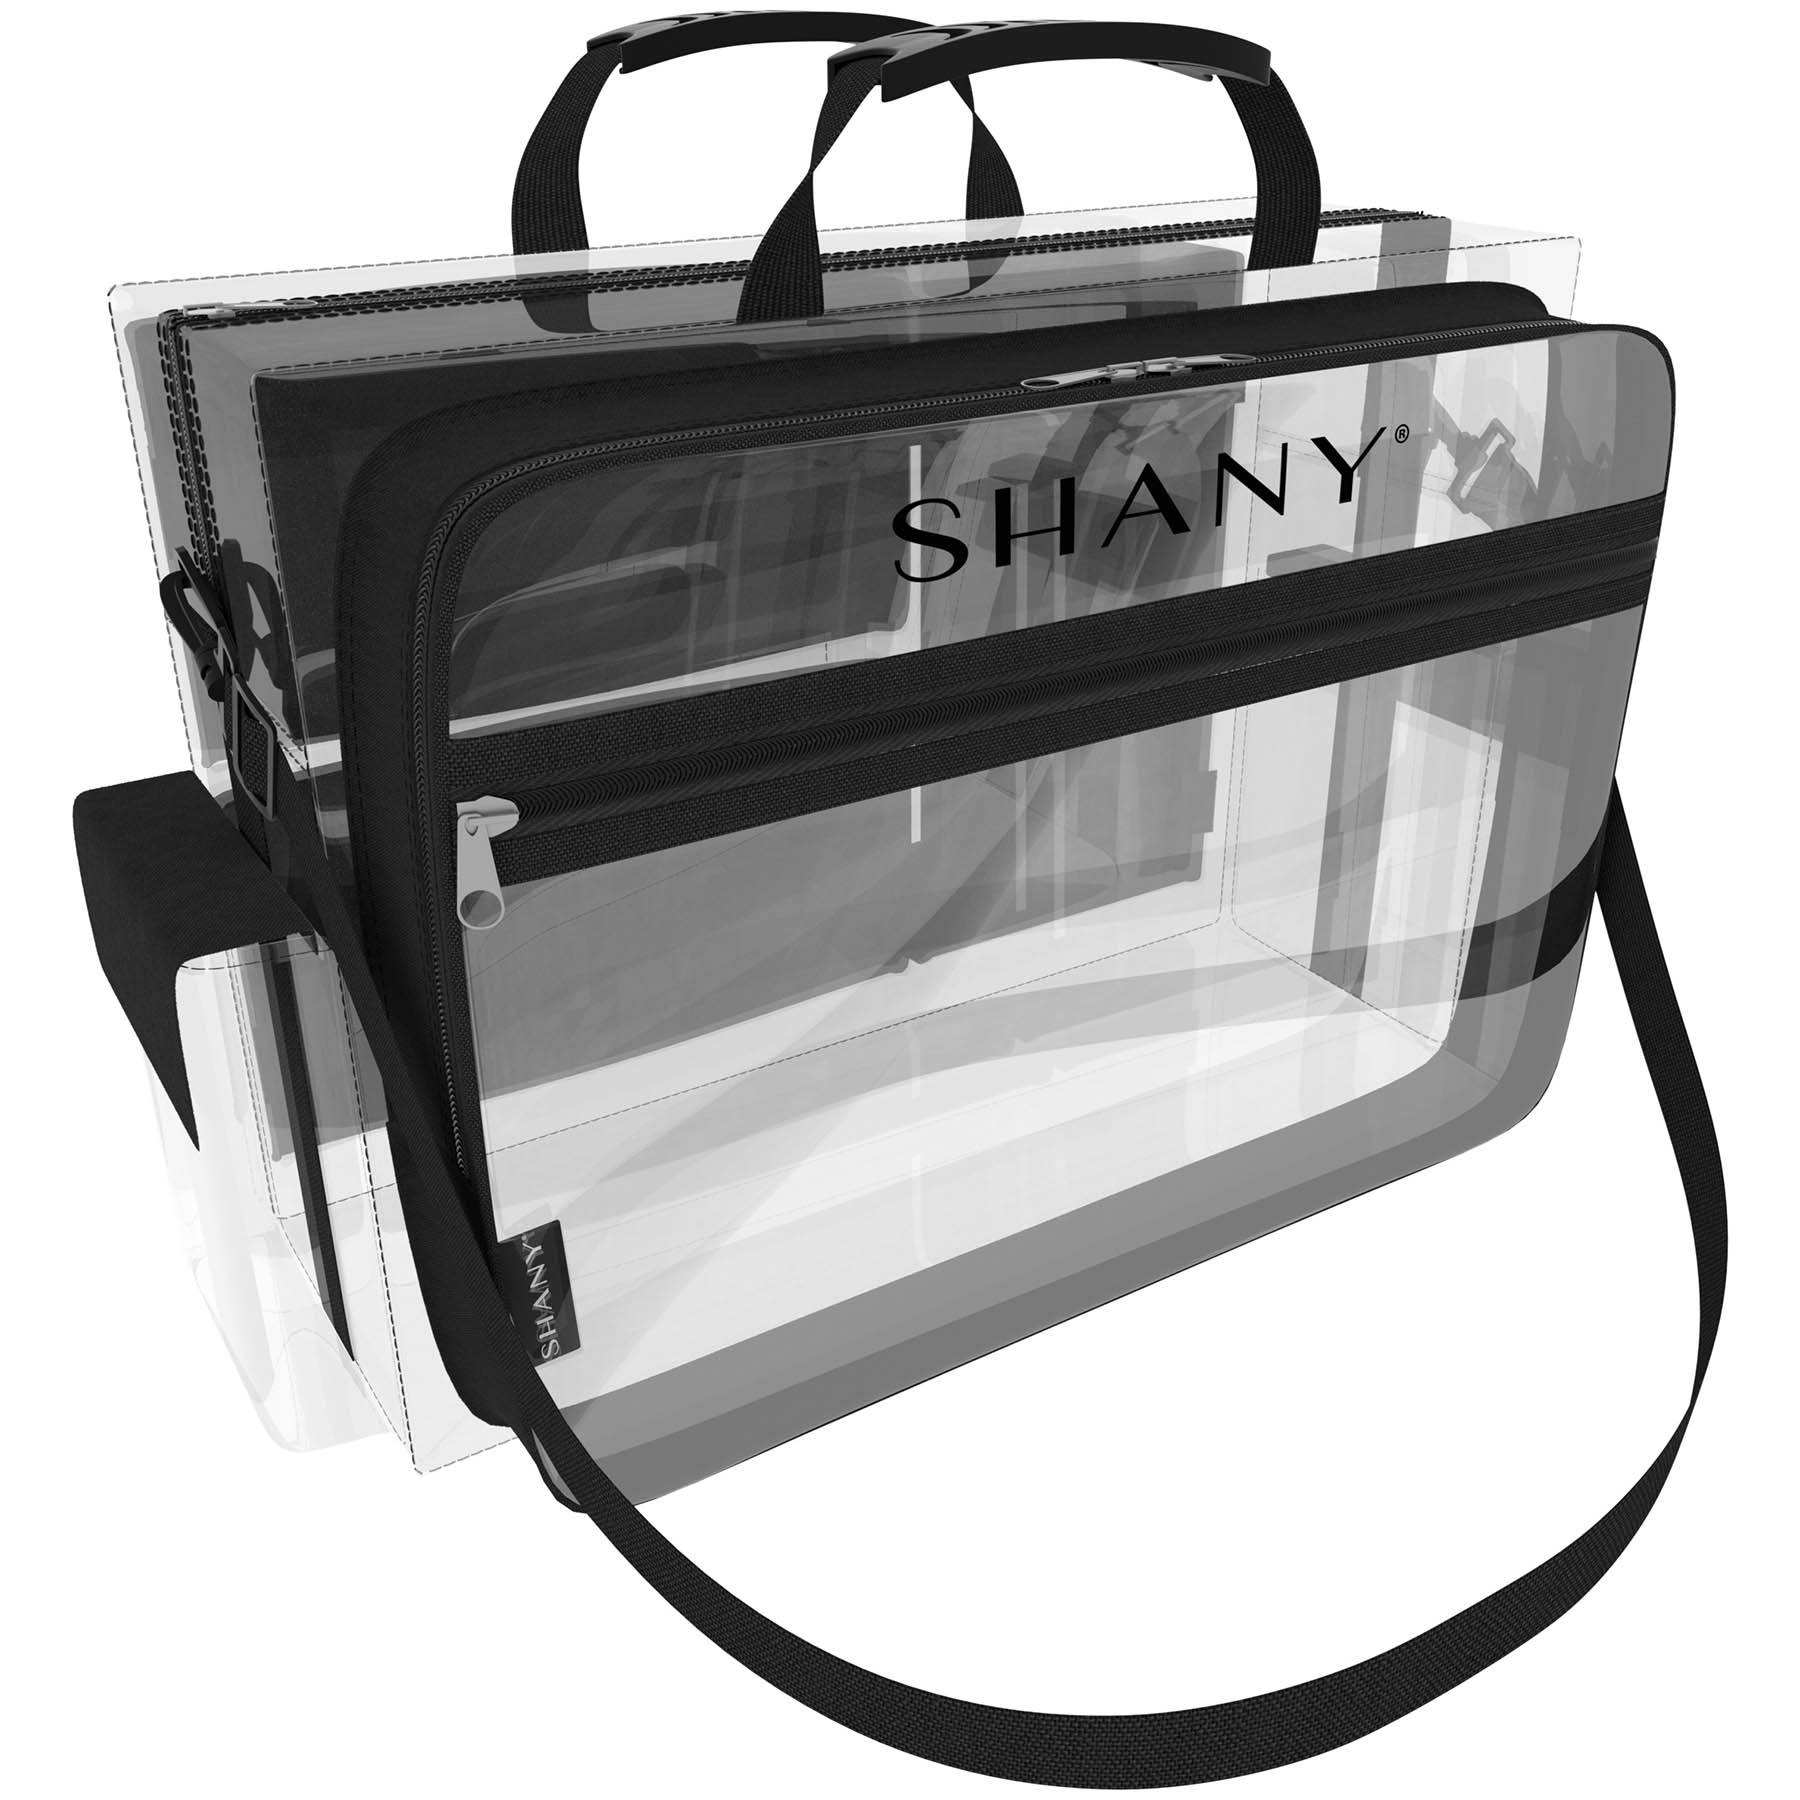 SHANY Travel Makeup Artist Bag with Removable Compartments â